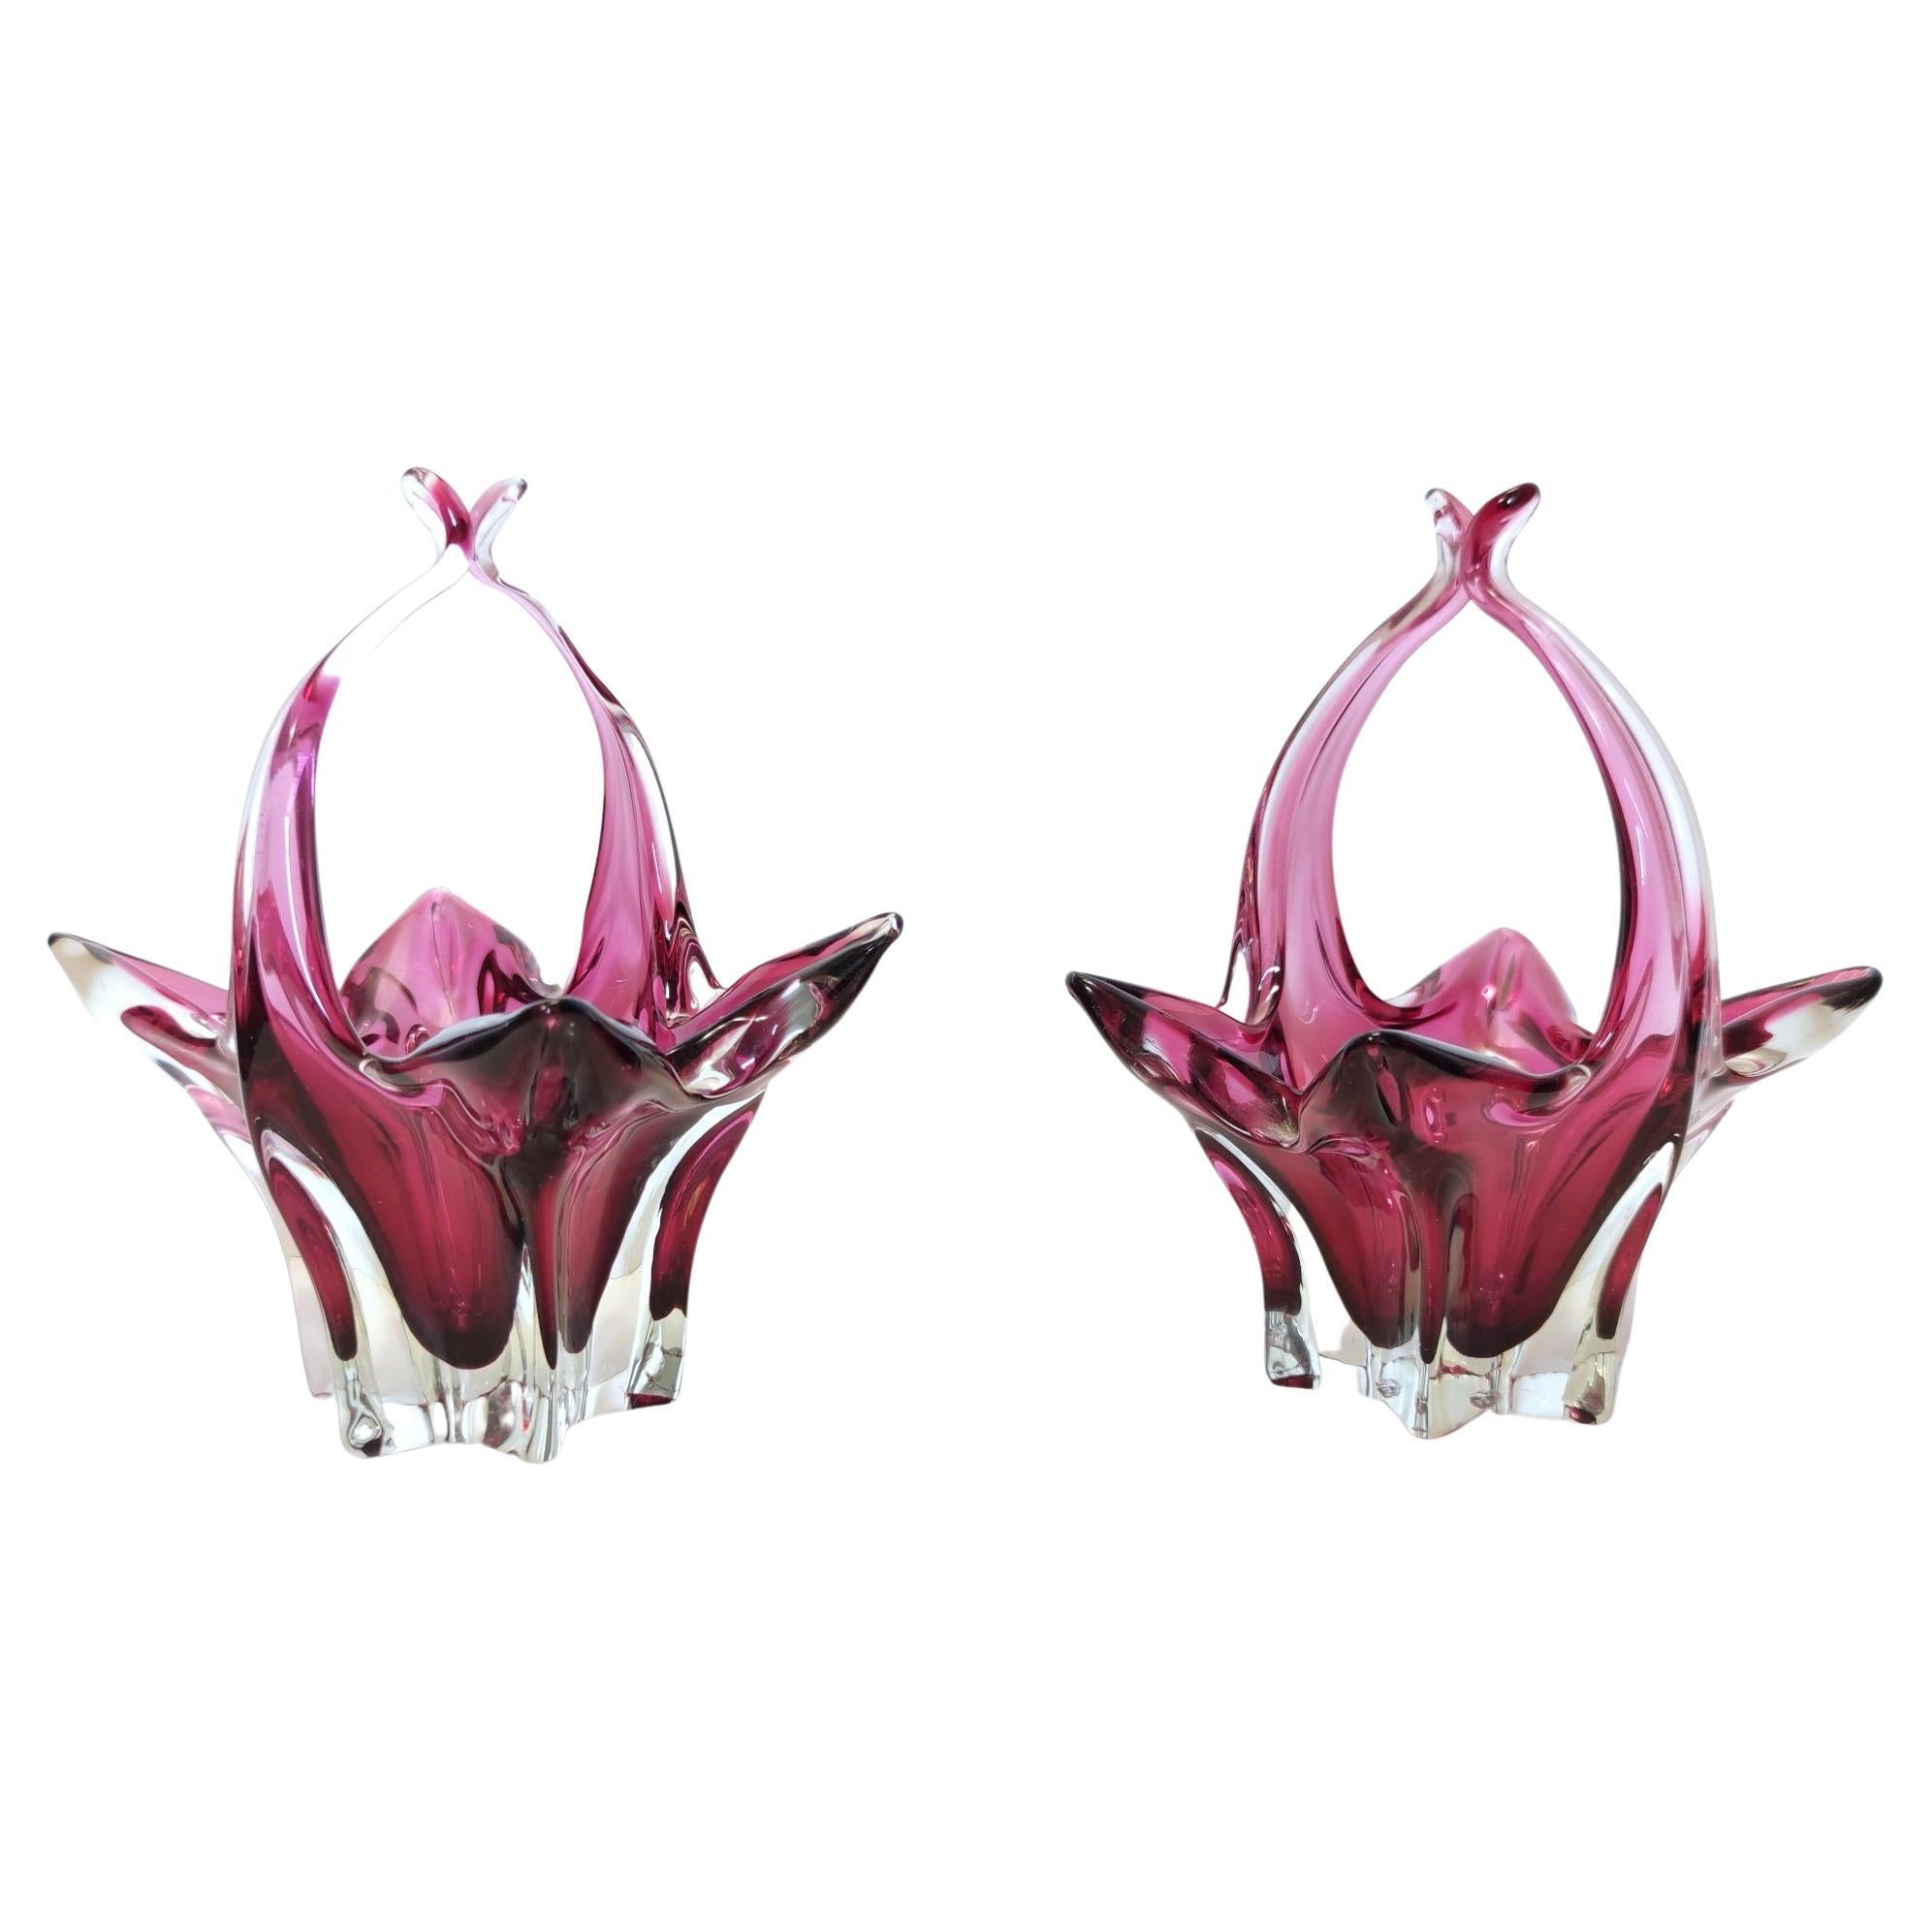 Pair of Vintage Pink Murano Glass Bonbonnières / Bowls, Italy